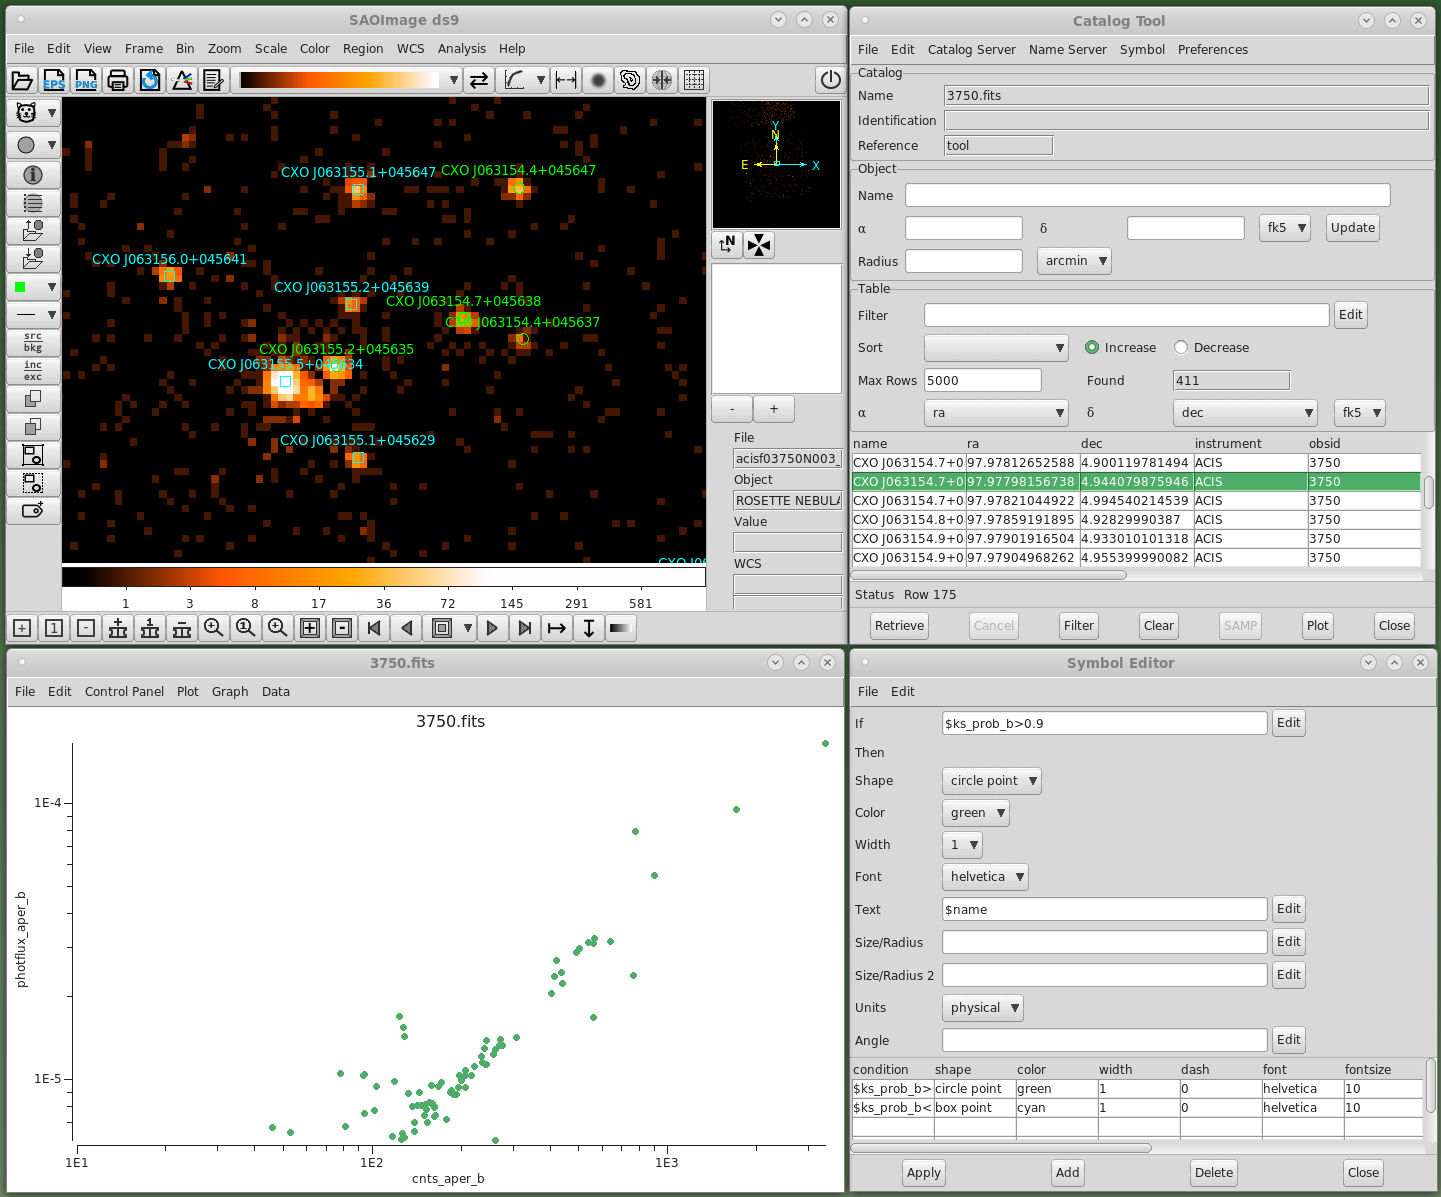 A screenshot of SAOImageDS9 as well as three ancillary windows: a catalog tool, a plot window, and a symbol editor. The DS9 window shows an astronomical image with multiple individual sources labeled; the color scheme of this image is a dark black background rising to orange and white at the locations of point sources. The Catalog tool shows a table of data, with one entry highlighted. In the plot window, a scatter plot of green points shows a mostly linear trend of counts (X-Axis) with photon flux (Y-Axis). There are of order one hundred points shown. Finally, the Symbol Editor is a window with a series of text entry boxes and drop-down menus, allowing for conditions to specify the shape, width, and other properties of points when met.